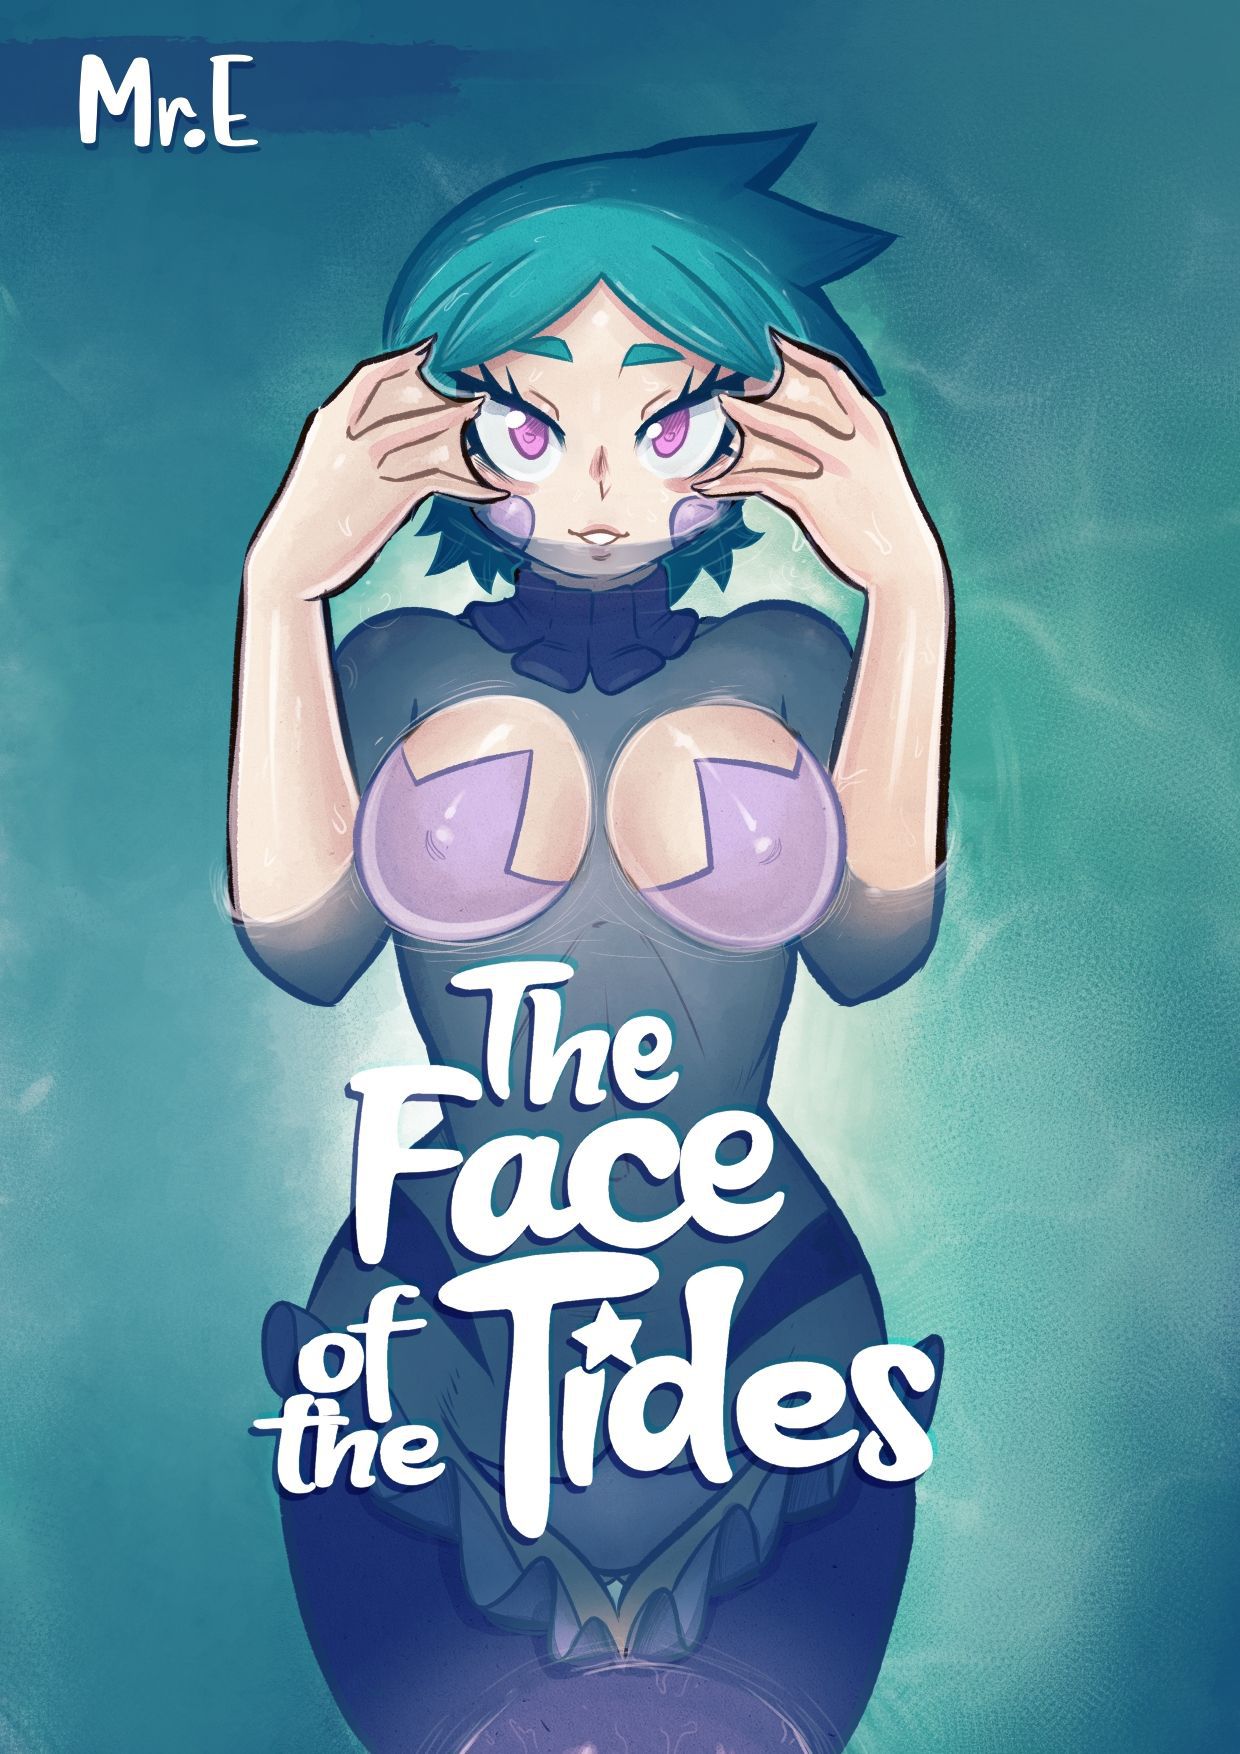 [Mr.E] The Face of the Tides 1